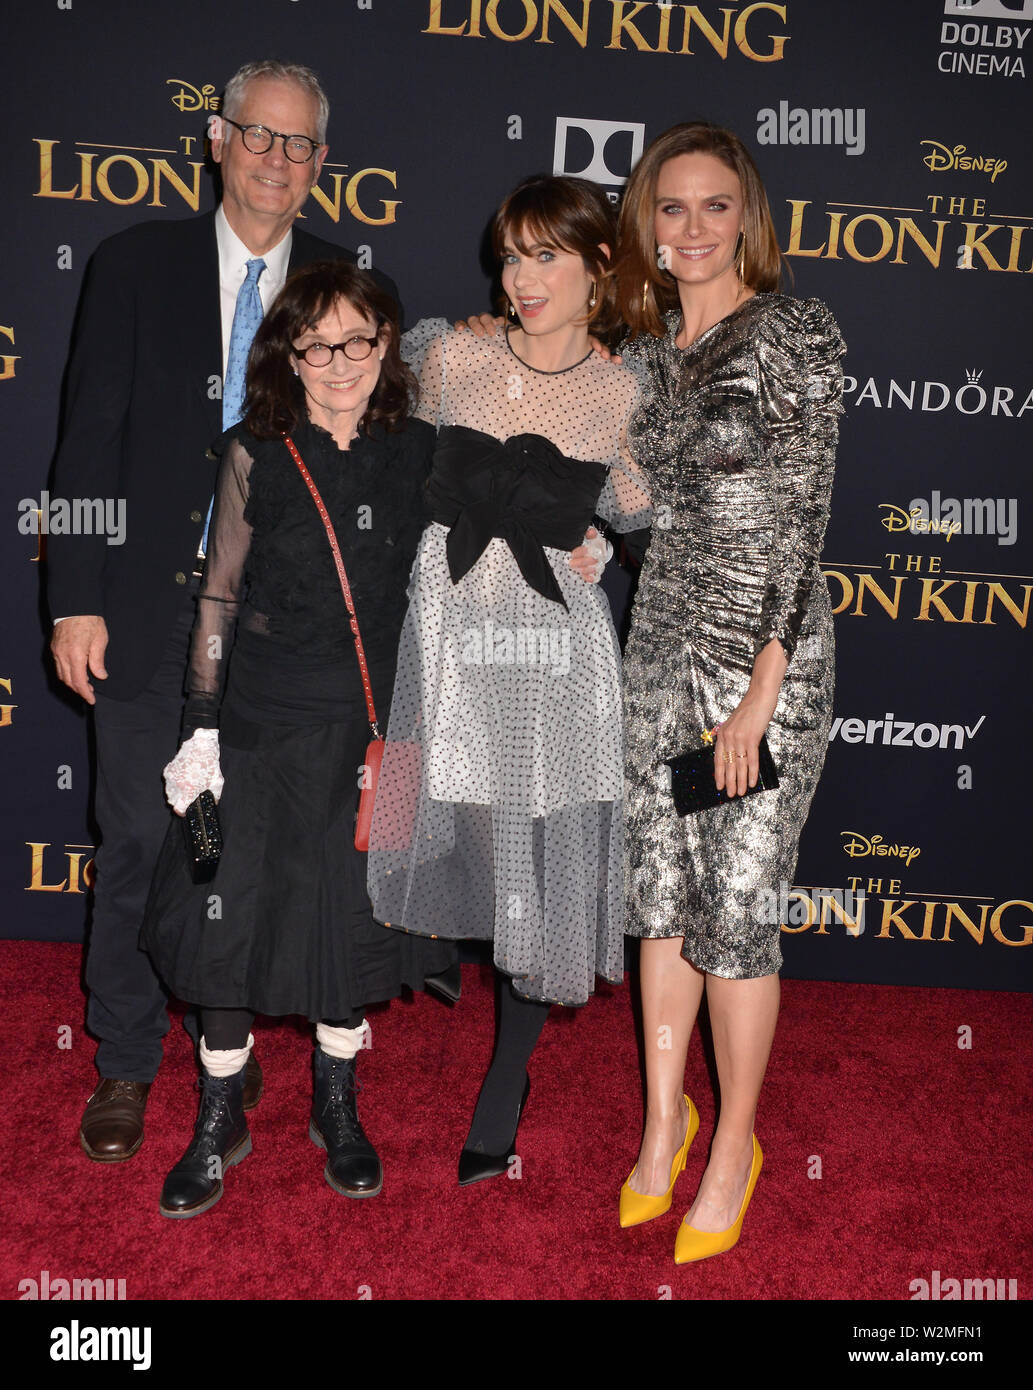 Los Angeles, USA. 9th July, 2019. Mary Jo Deschanel, Zooey Deschanel, Emily Deschanel, and Caleb Deschanel 054 attend the premiere of Disney's 'The Lion King' at Dolby Theatre on July 09, 2019 in Hollywood, California Credit: Tsuni/USA/Alamy Live News Stock Photo